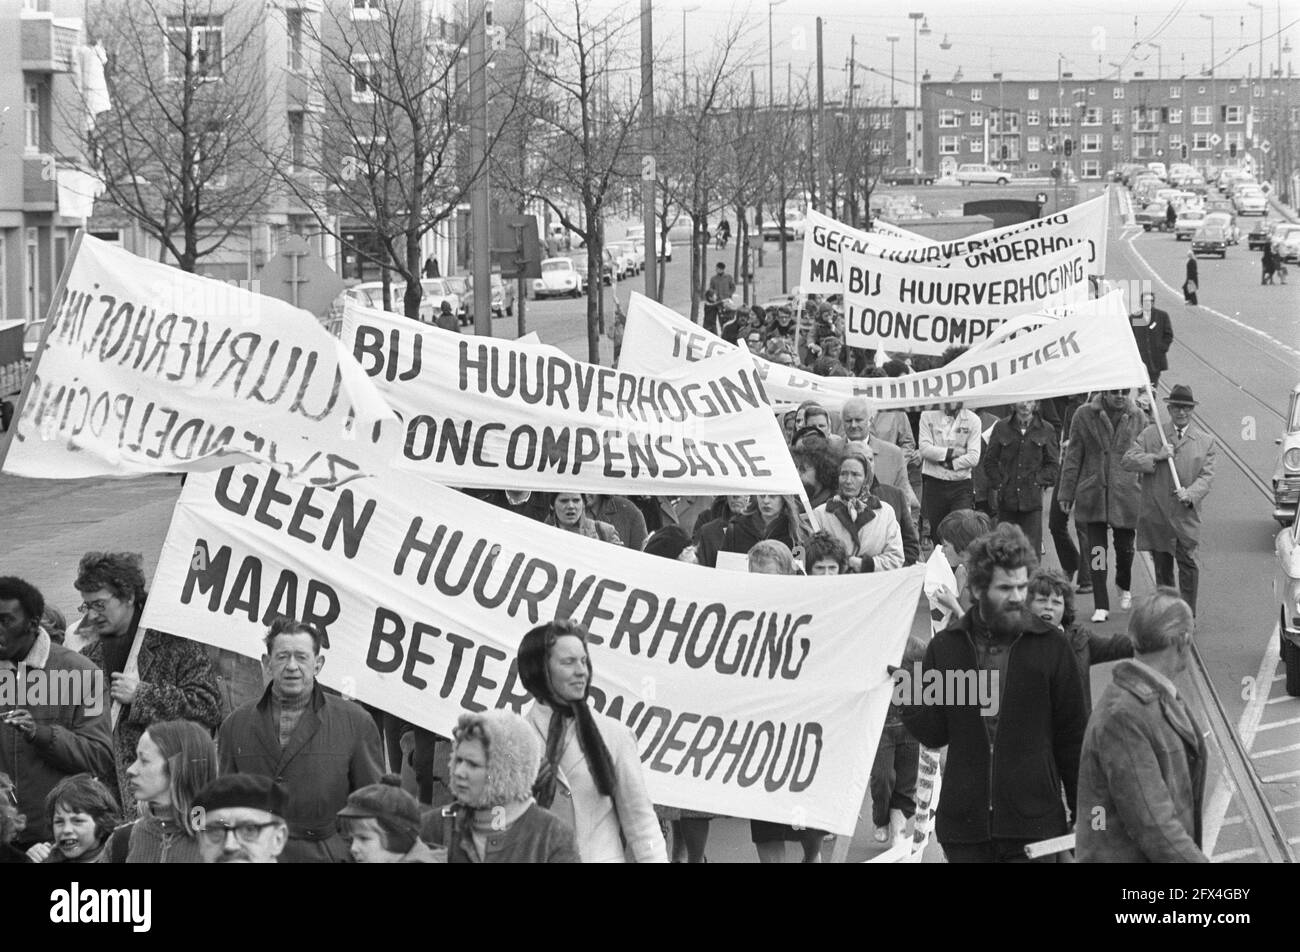 Demonstration in Amsterdam against housing policy and rent harmonization; demonstrators with banners, April 15, 1972, SPANDOEKS, Demonstrations, The Netherlands, 20th century press agency photo, news to remember, documentary, historic photography 1945-1990, visual stories, human history of the Twentieth Century, capturing moments in time Stock Photo